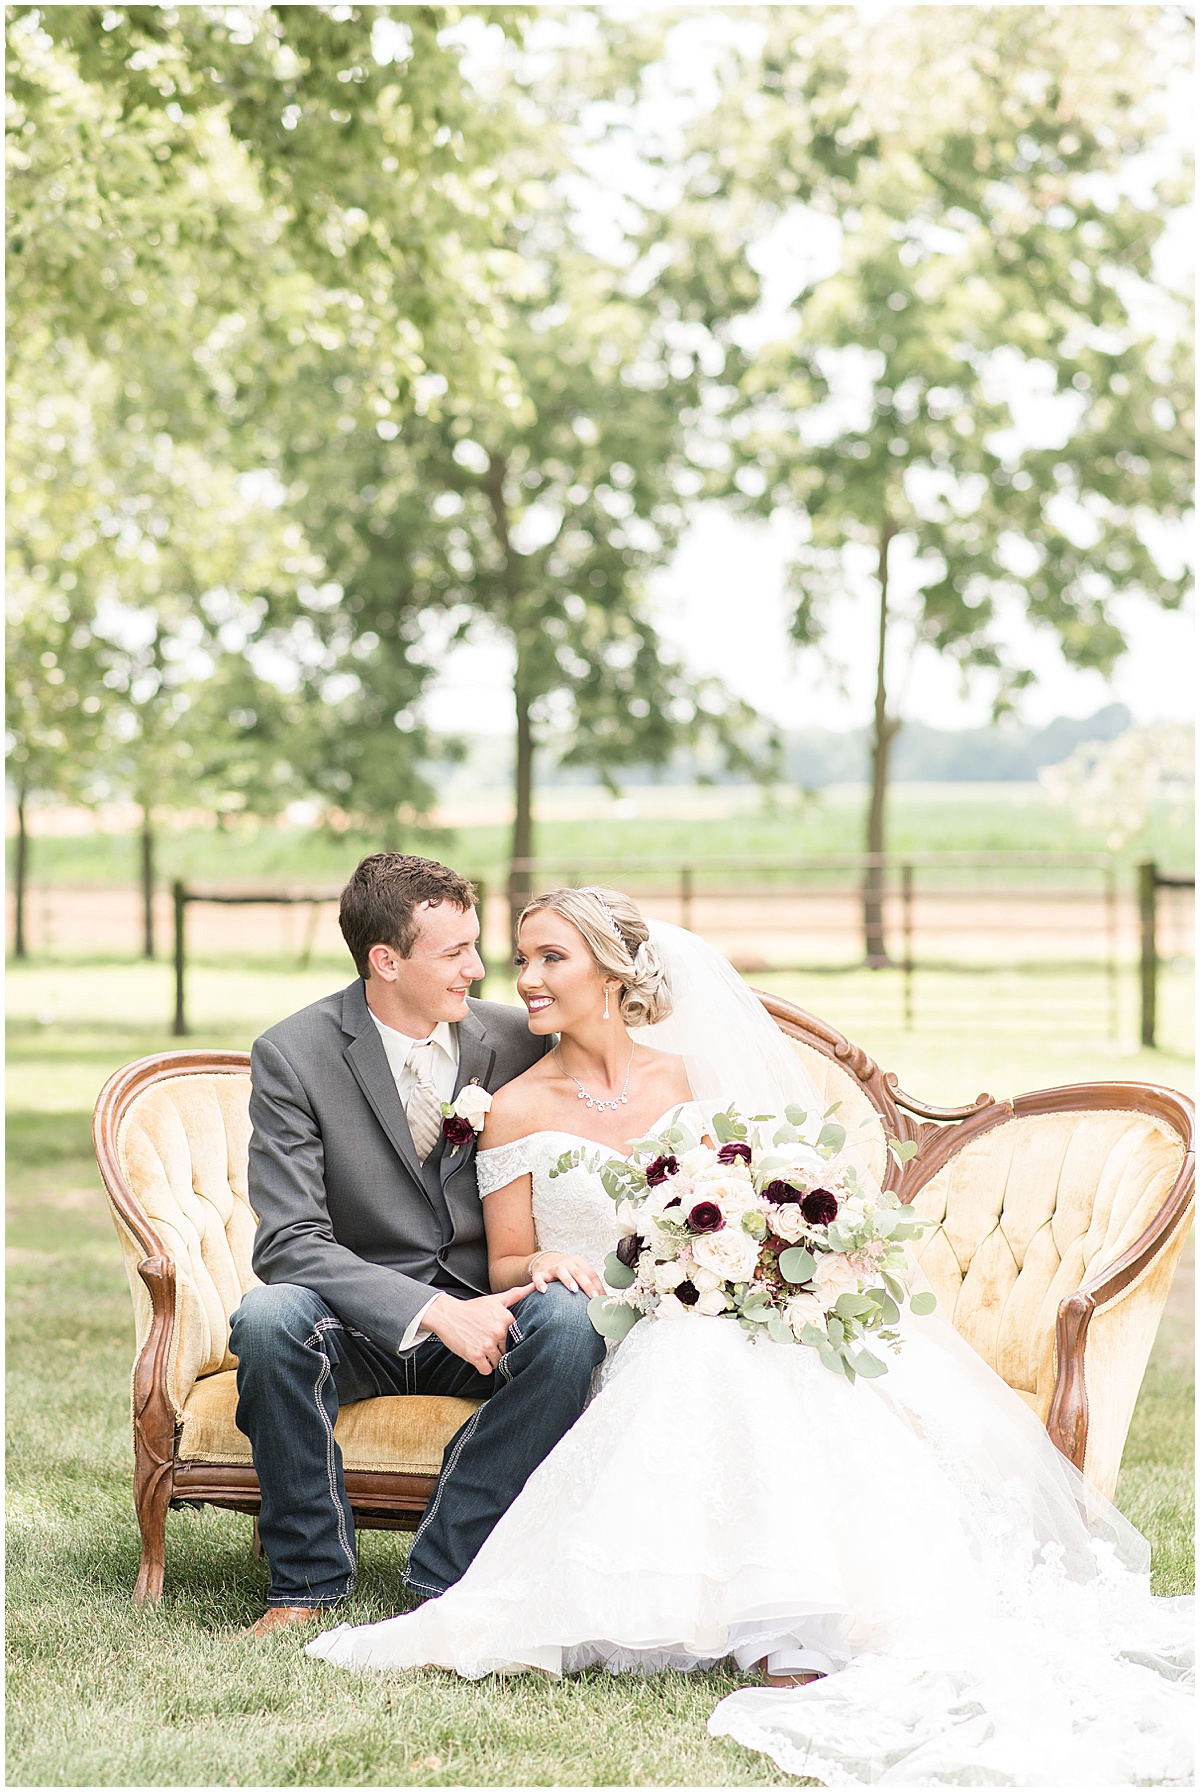 Wedding in Delphi, Indiana Photographed by Victoria Rayburn Photography